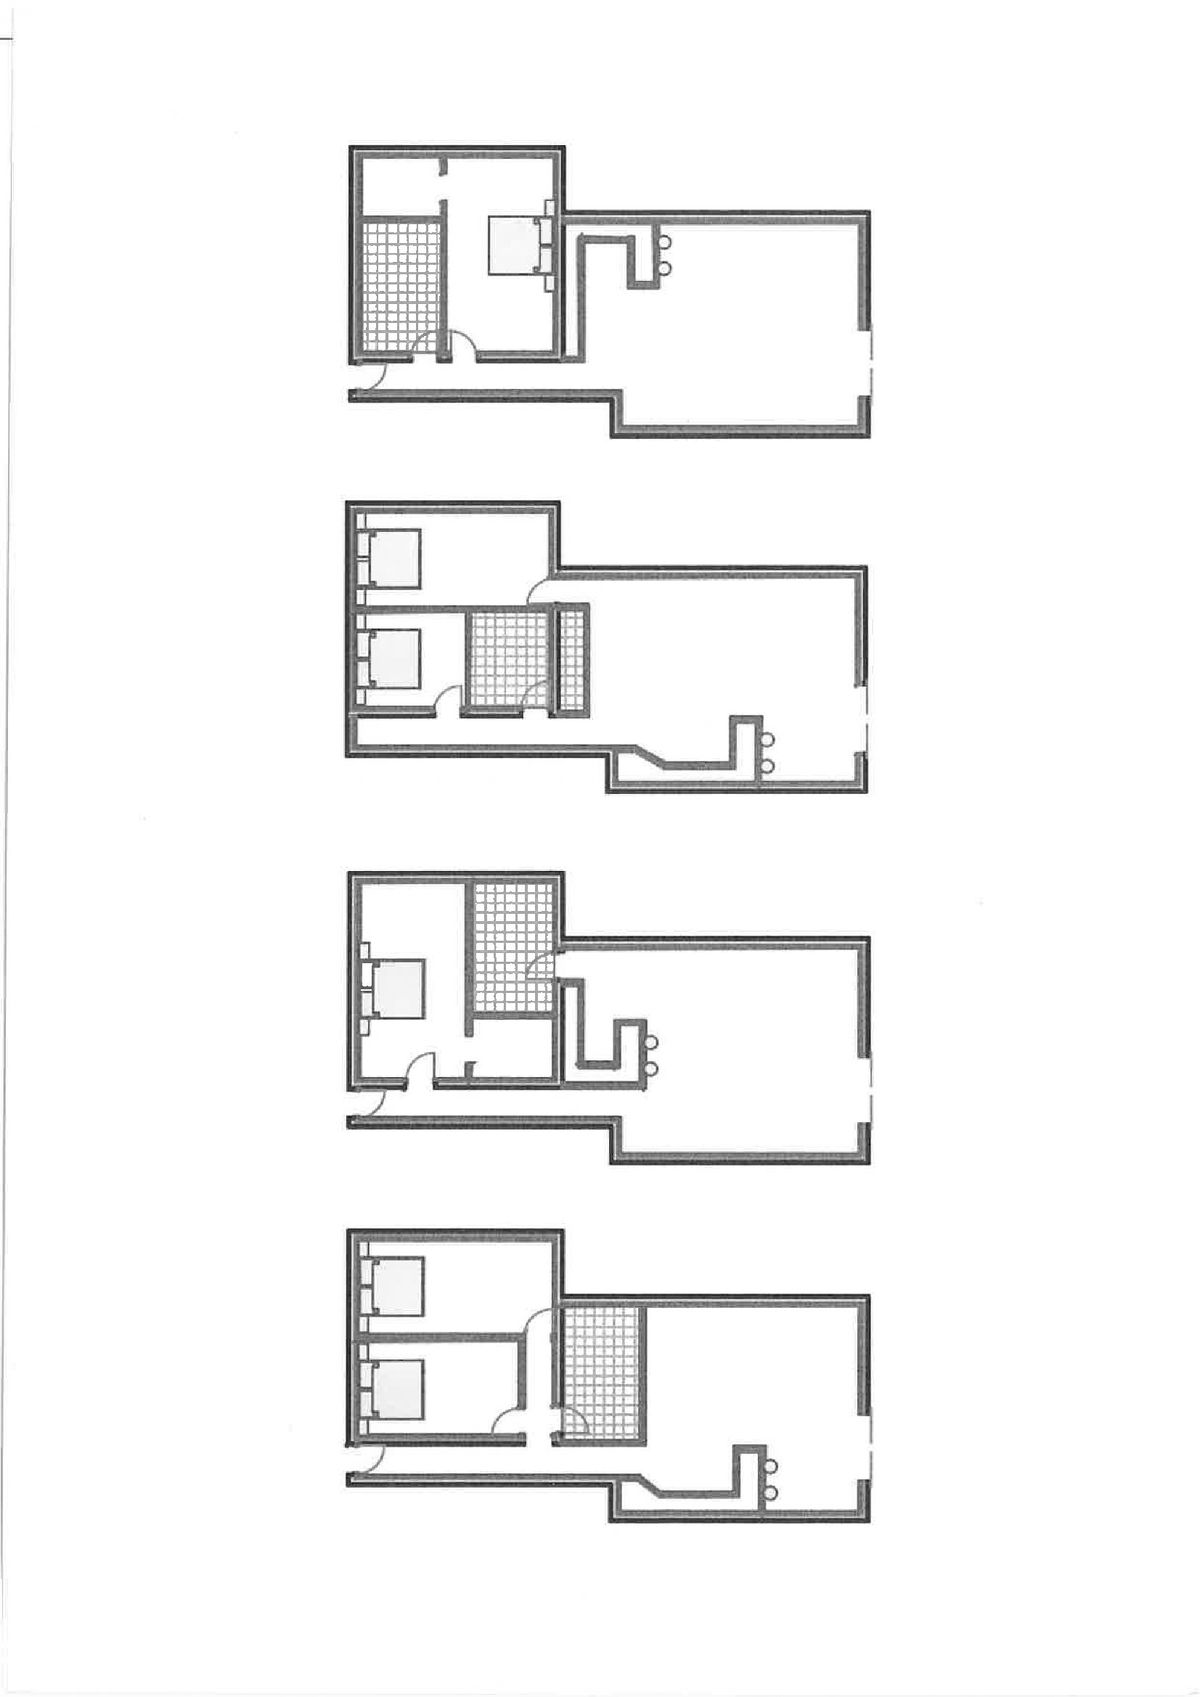 Floor plan for under the house